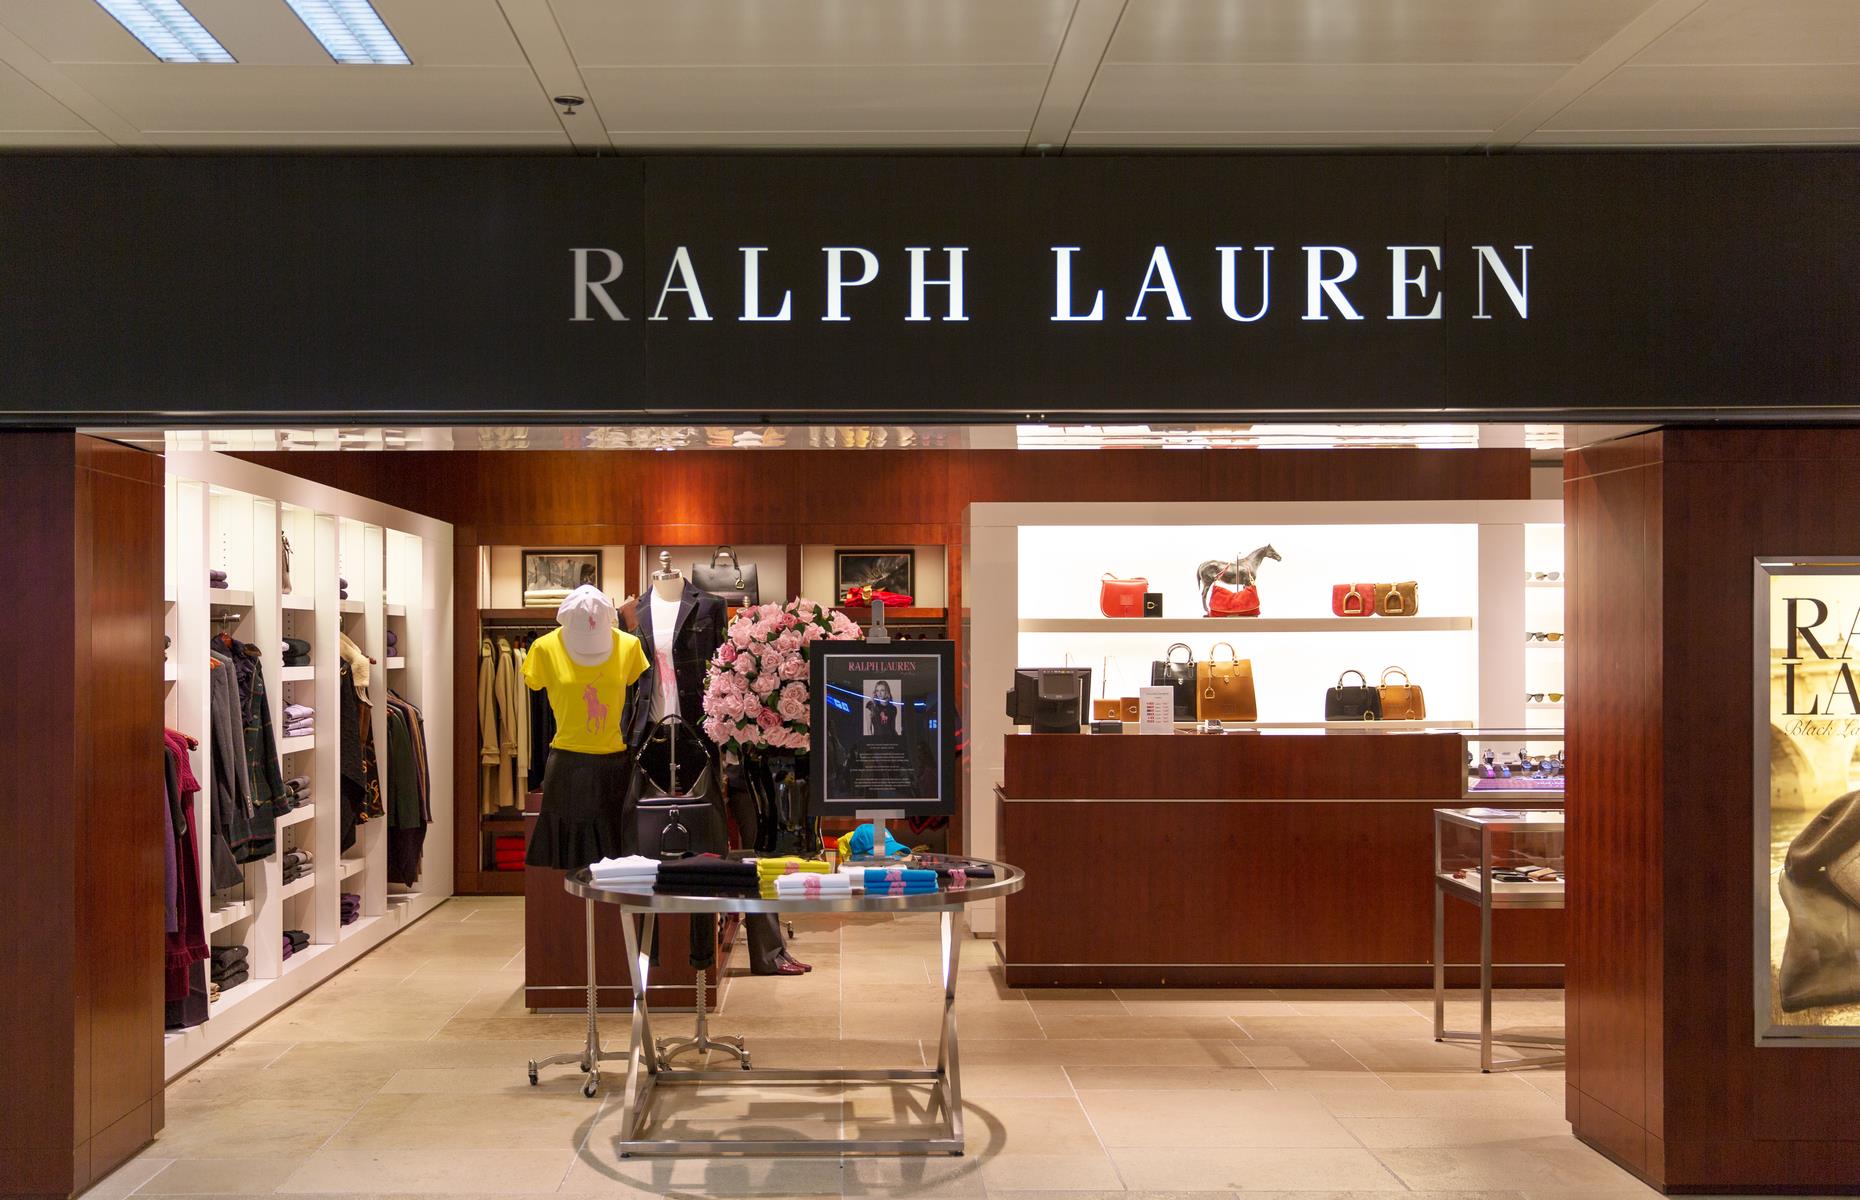 Ralph Lauren stitches up medical masks and gowns